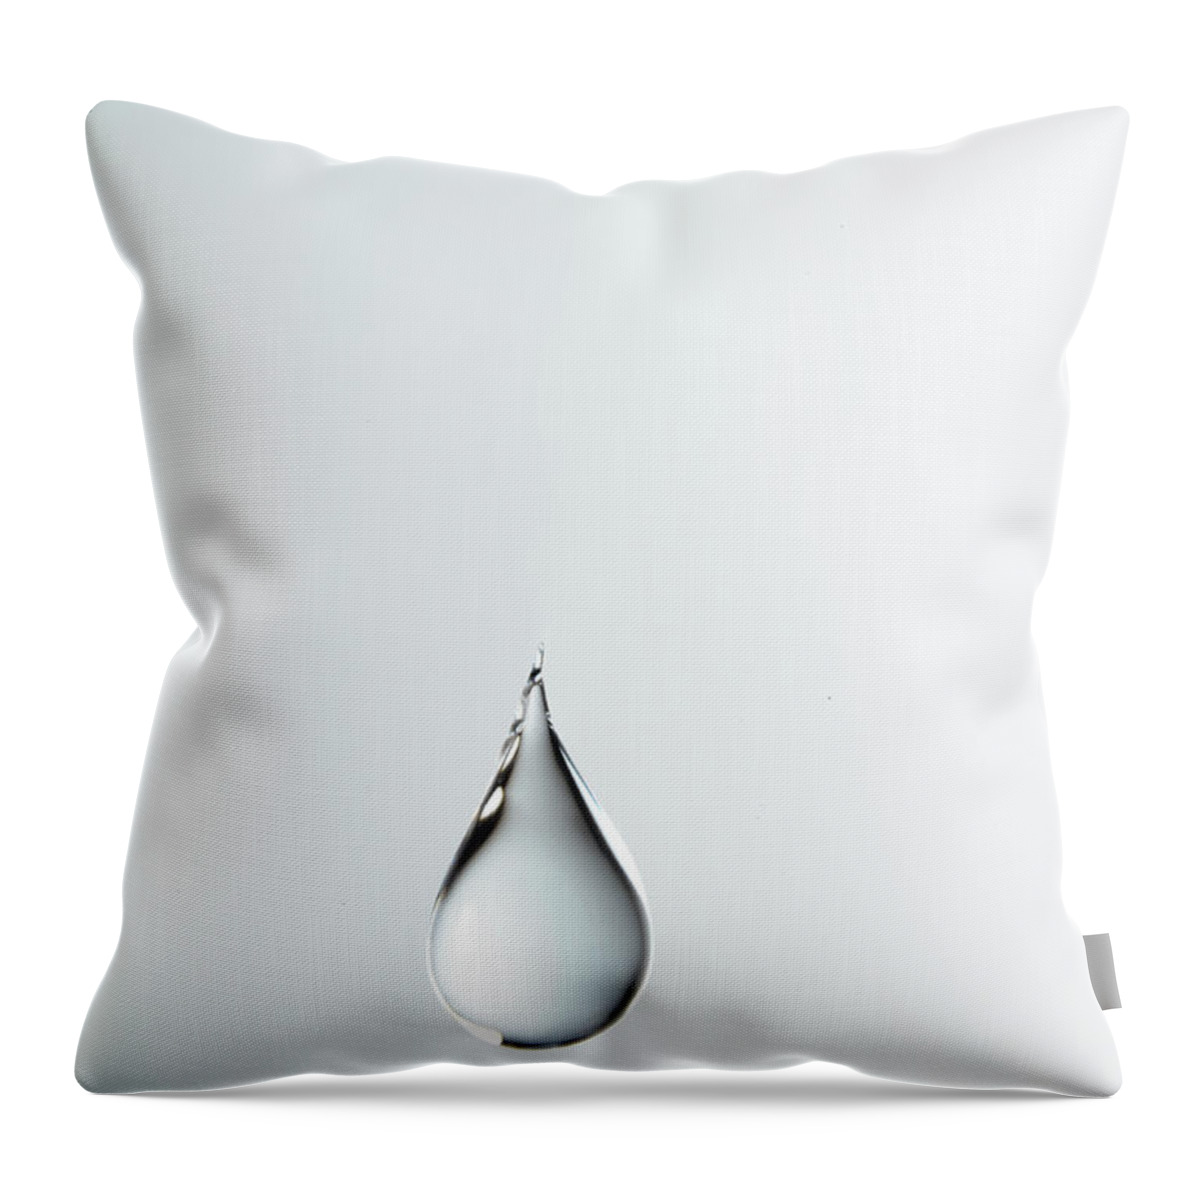 Wind Throw Pillow featuring the photograph Tear Shaped Water Drop Suspended In by Yamada Taro